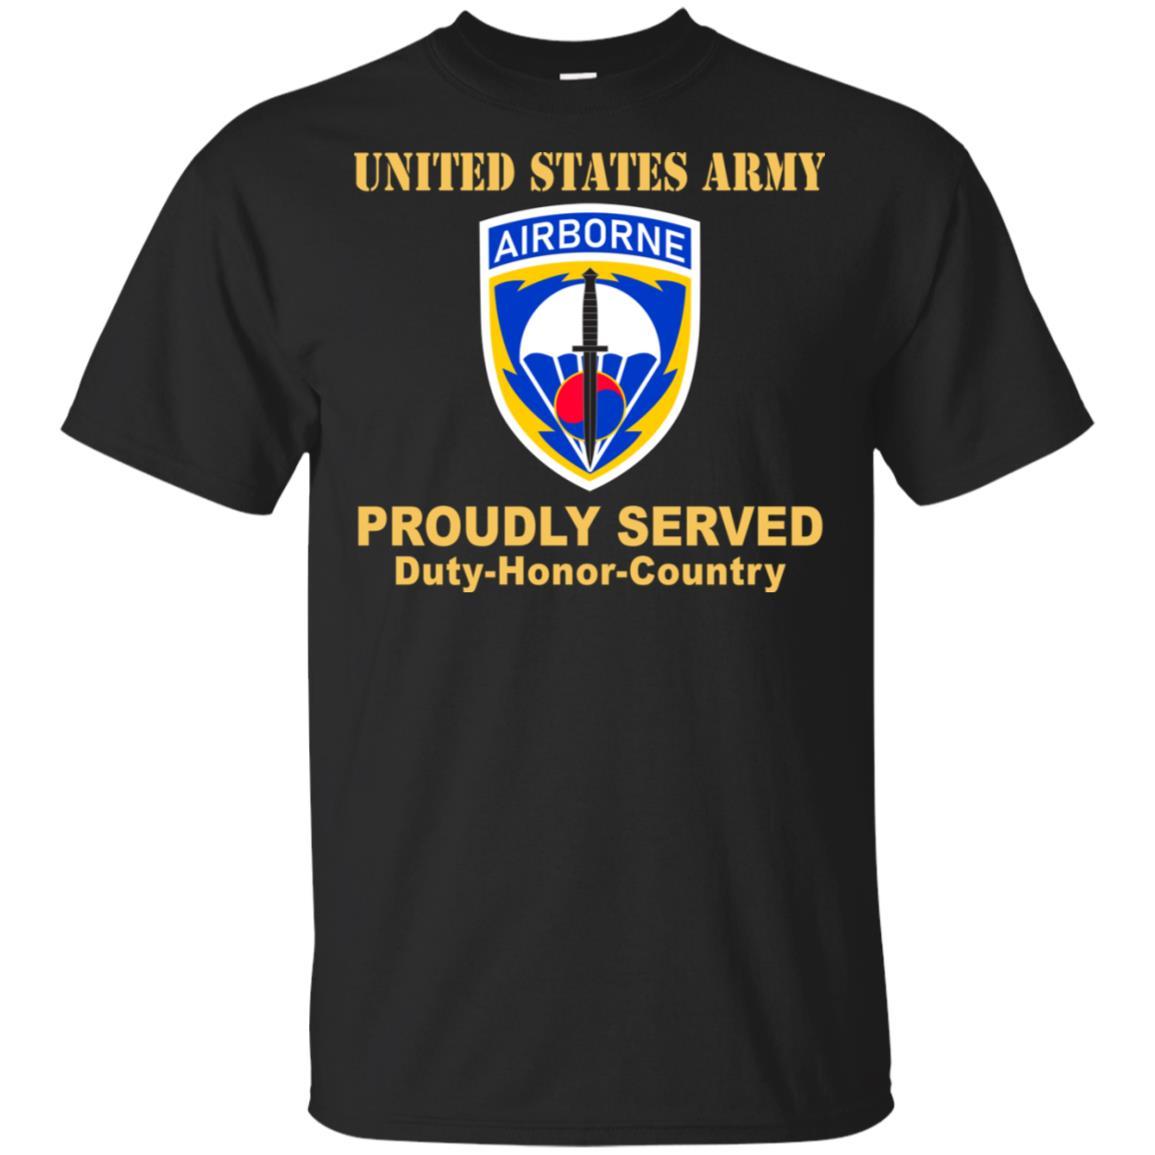 US ARMY SPECIAL OPERATIONS COMMAND KOREA- Proudly Served T-Shirt On Front For Men-TShirt-Army-Veterans Nation